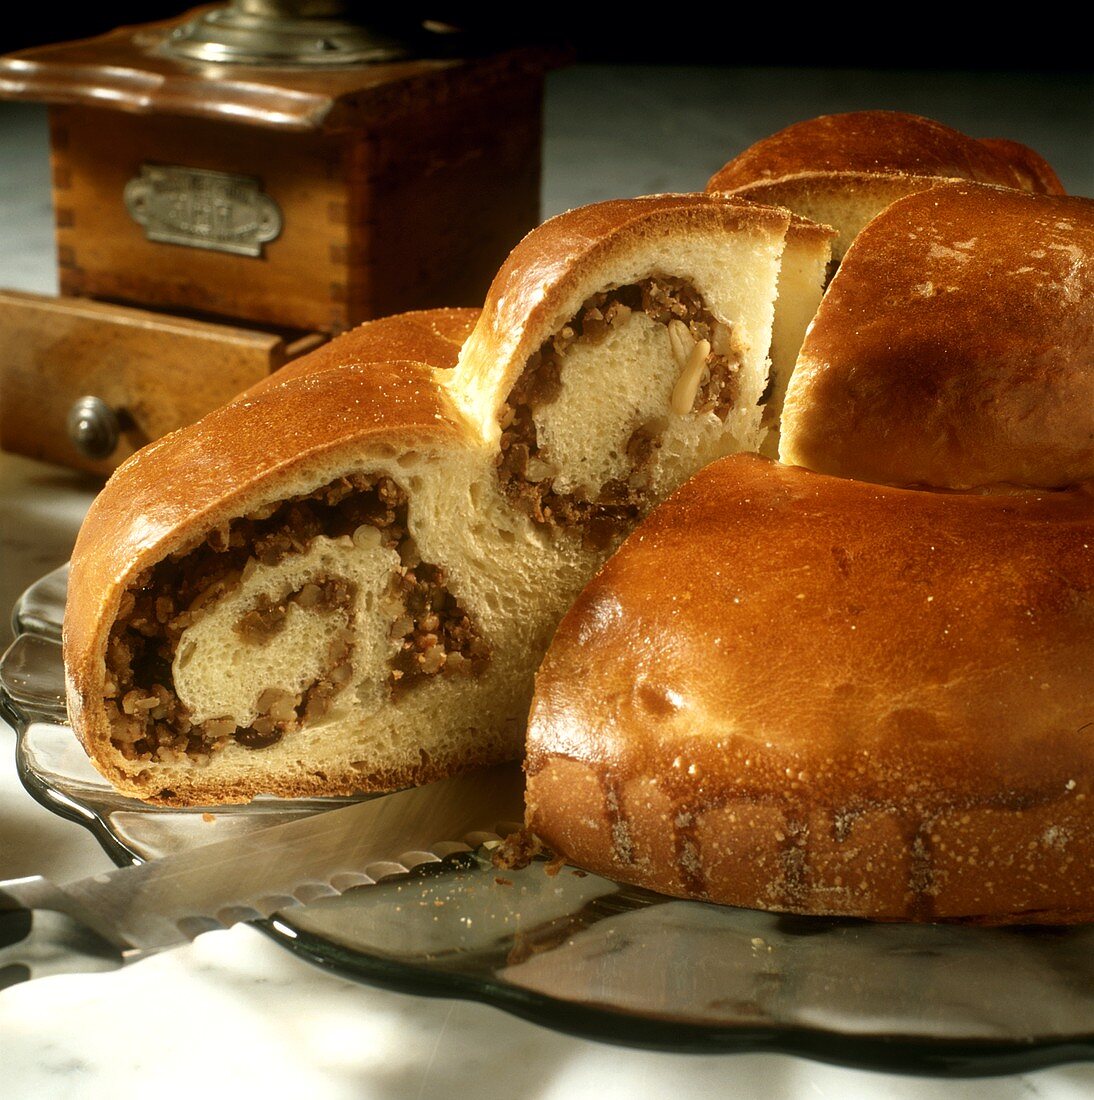 Austrian reindling (yeast cake with nut filling)